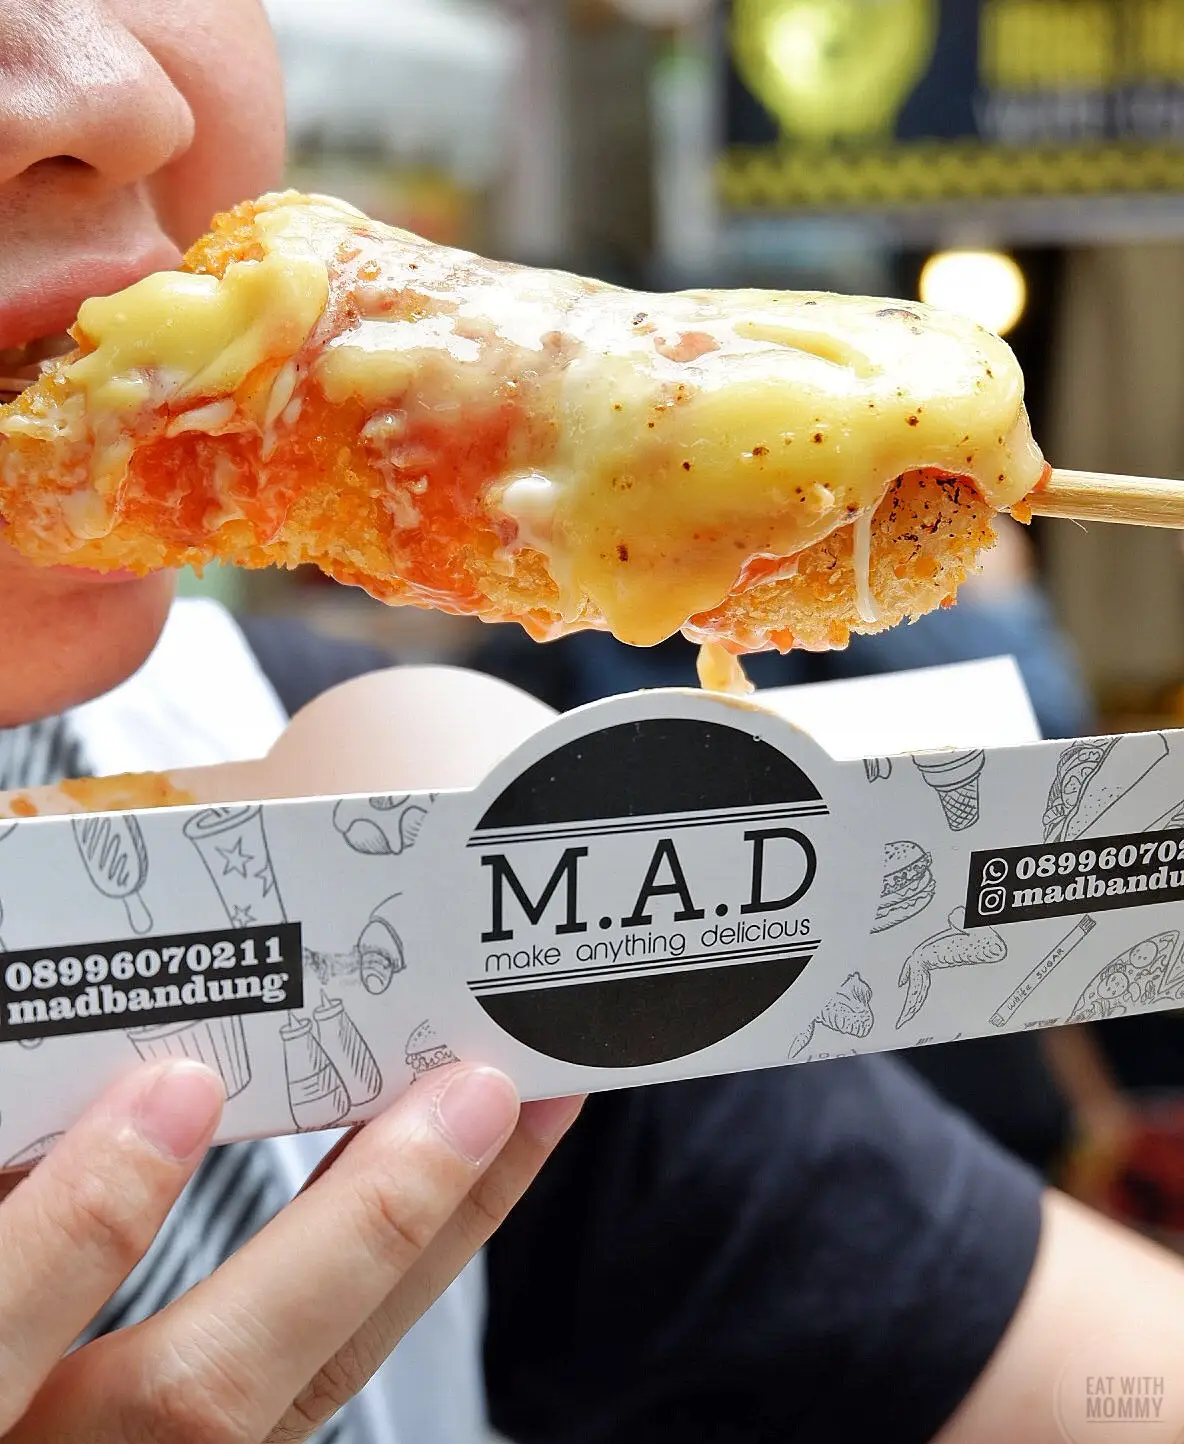 M.A.D (Make Anything Delicious)